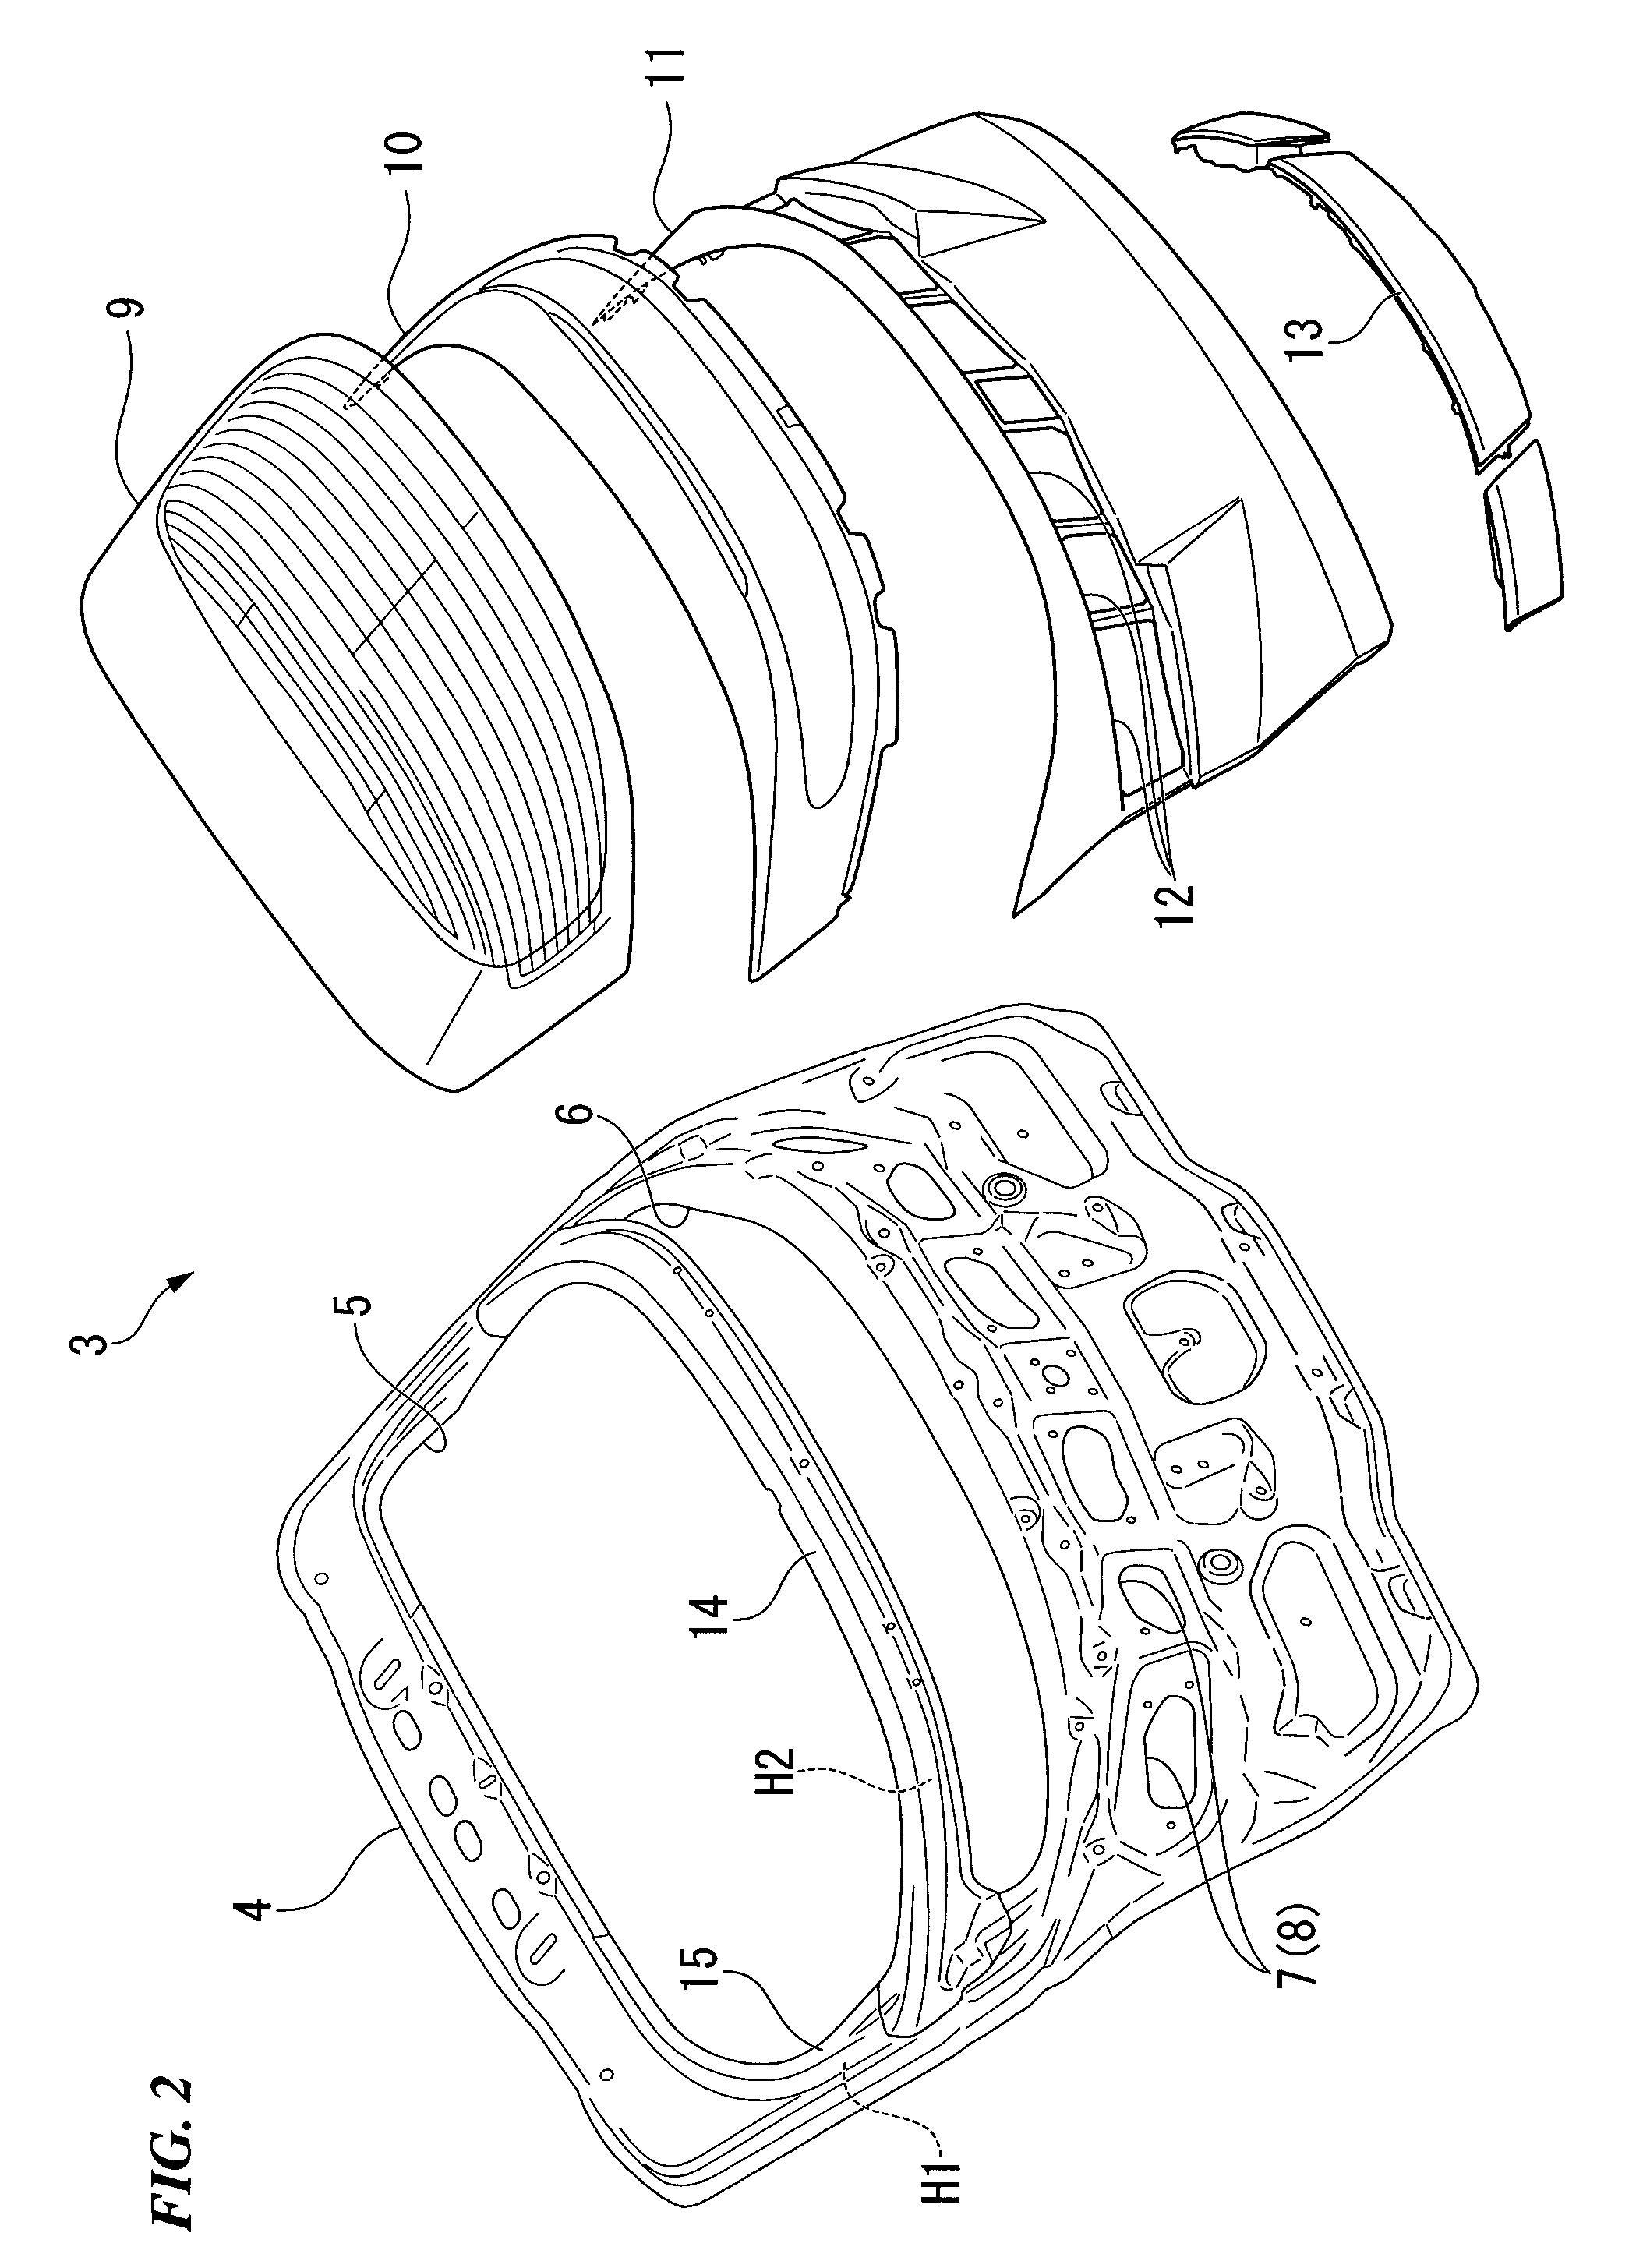 Vehicle rear door and method of assembling same